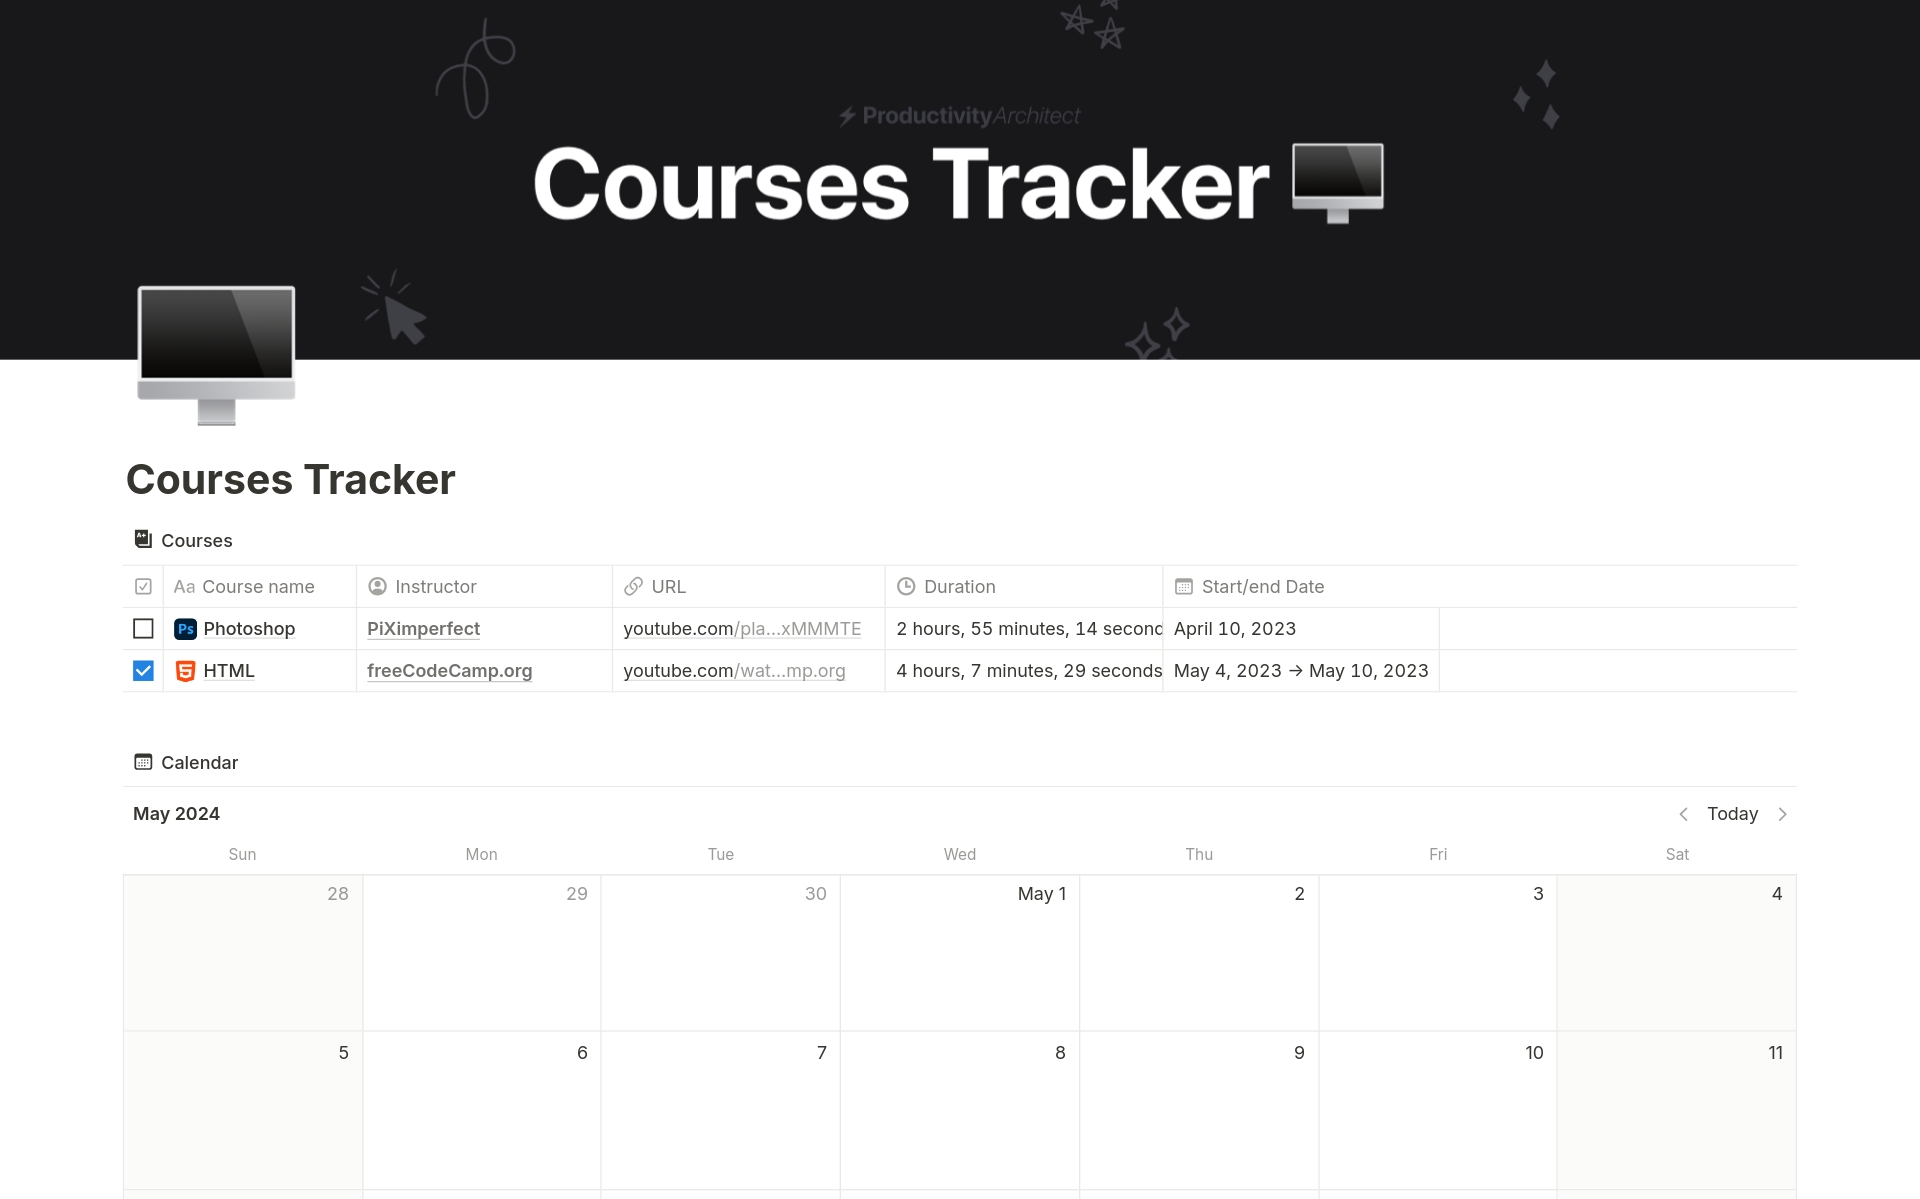 You'll get the most minimal courses tracker.